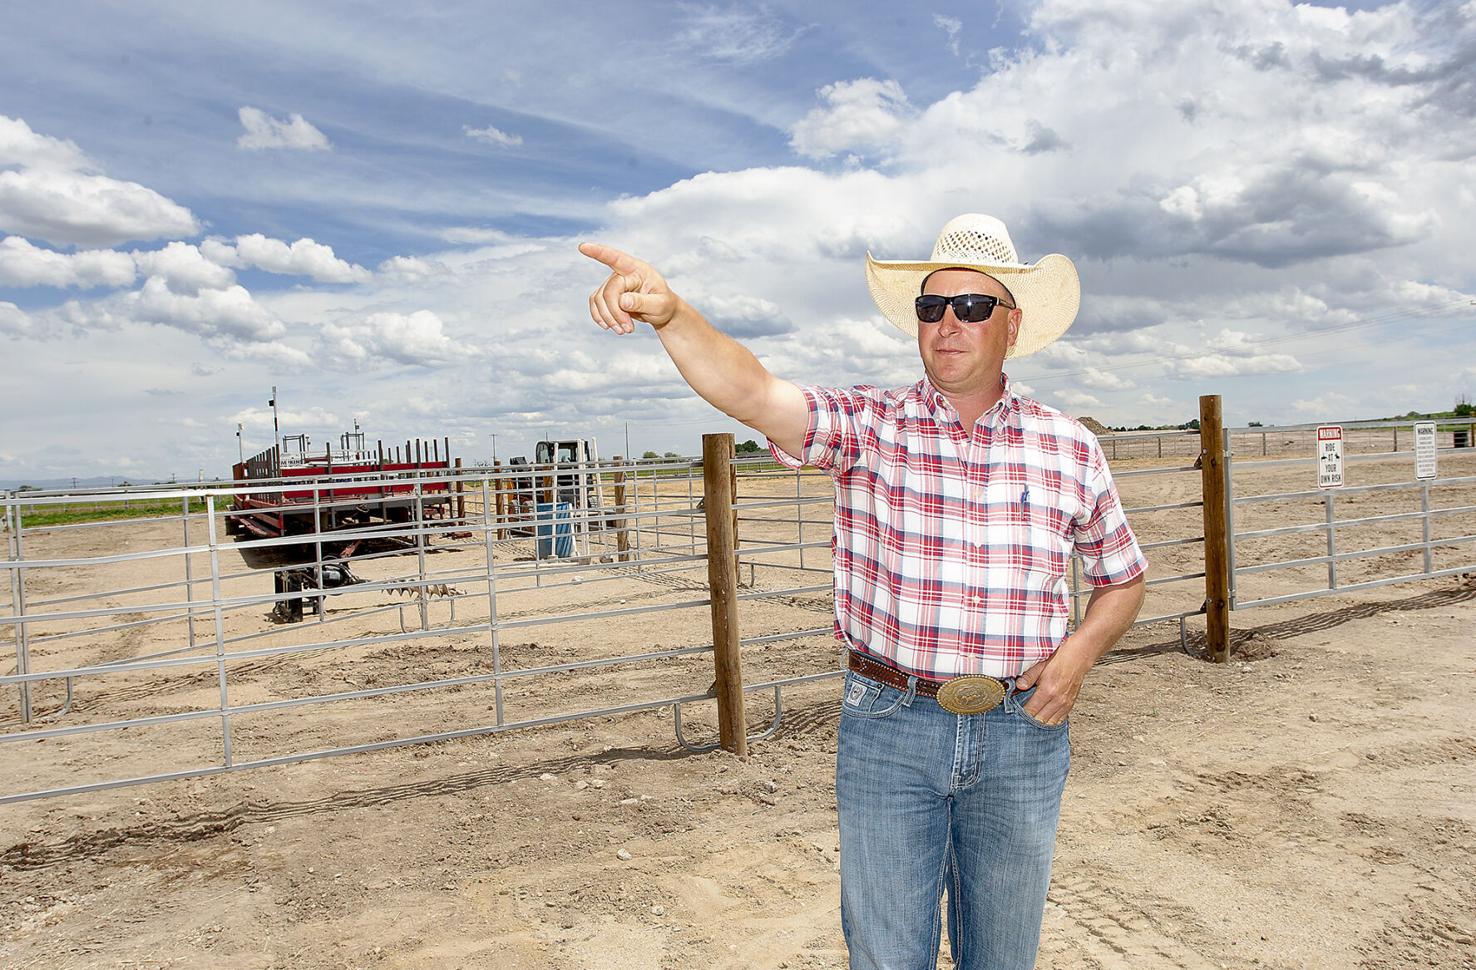 'A lot of work' First annual Kuna Rodeo preparations underway Local